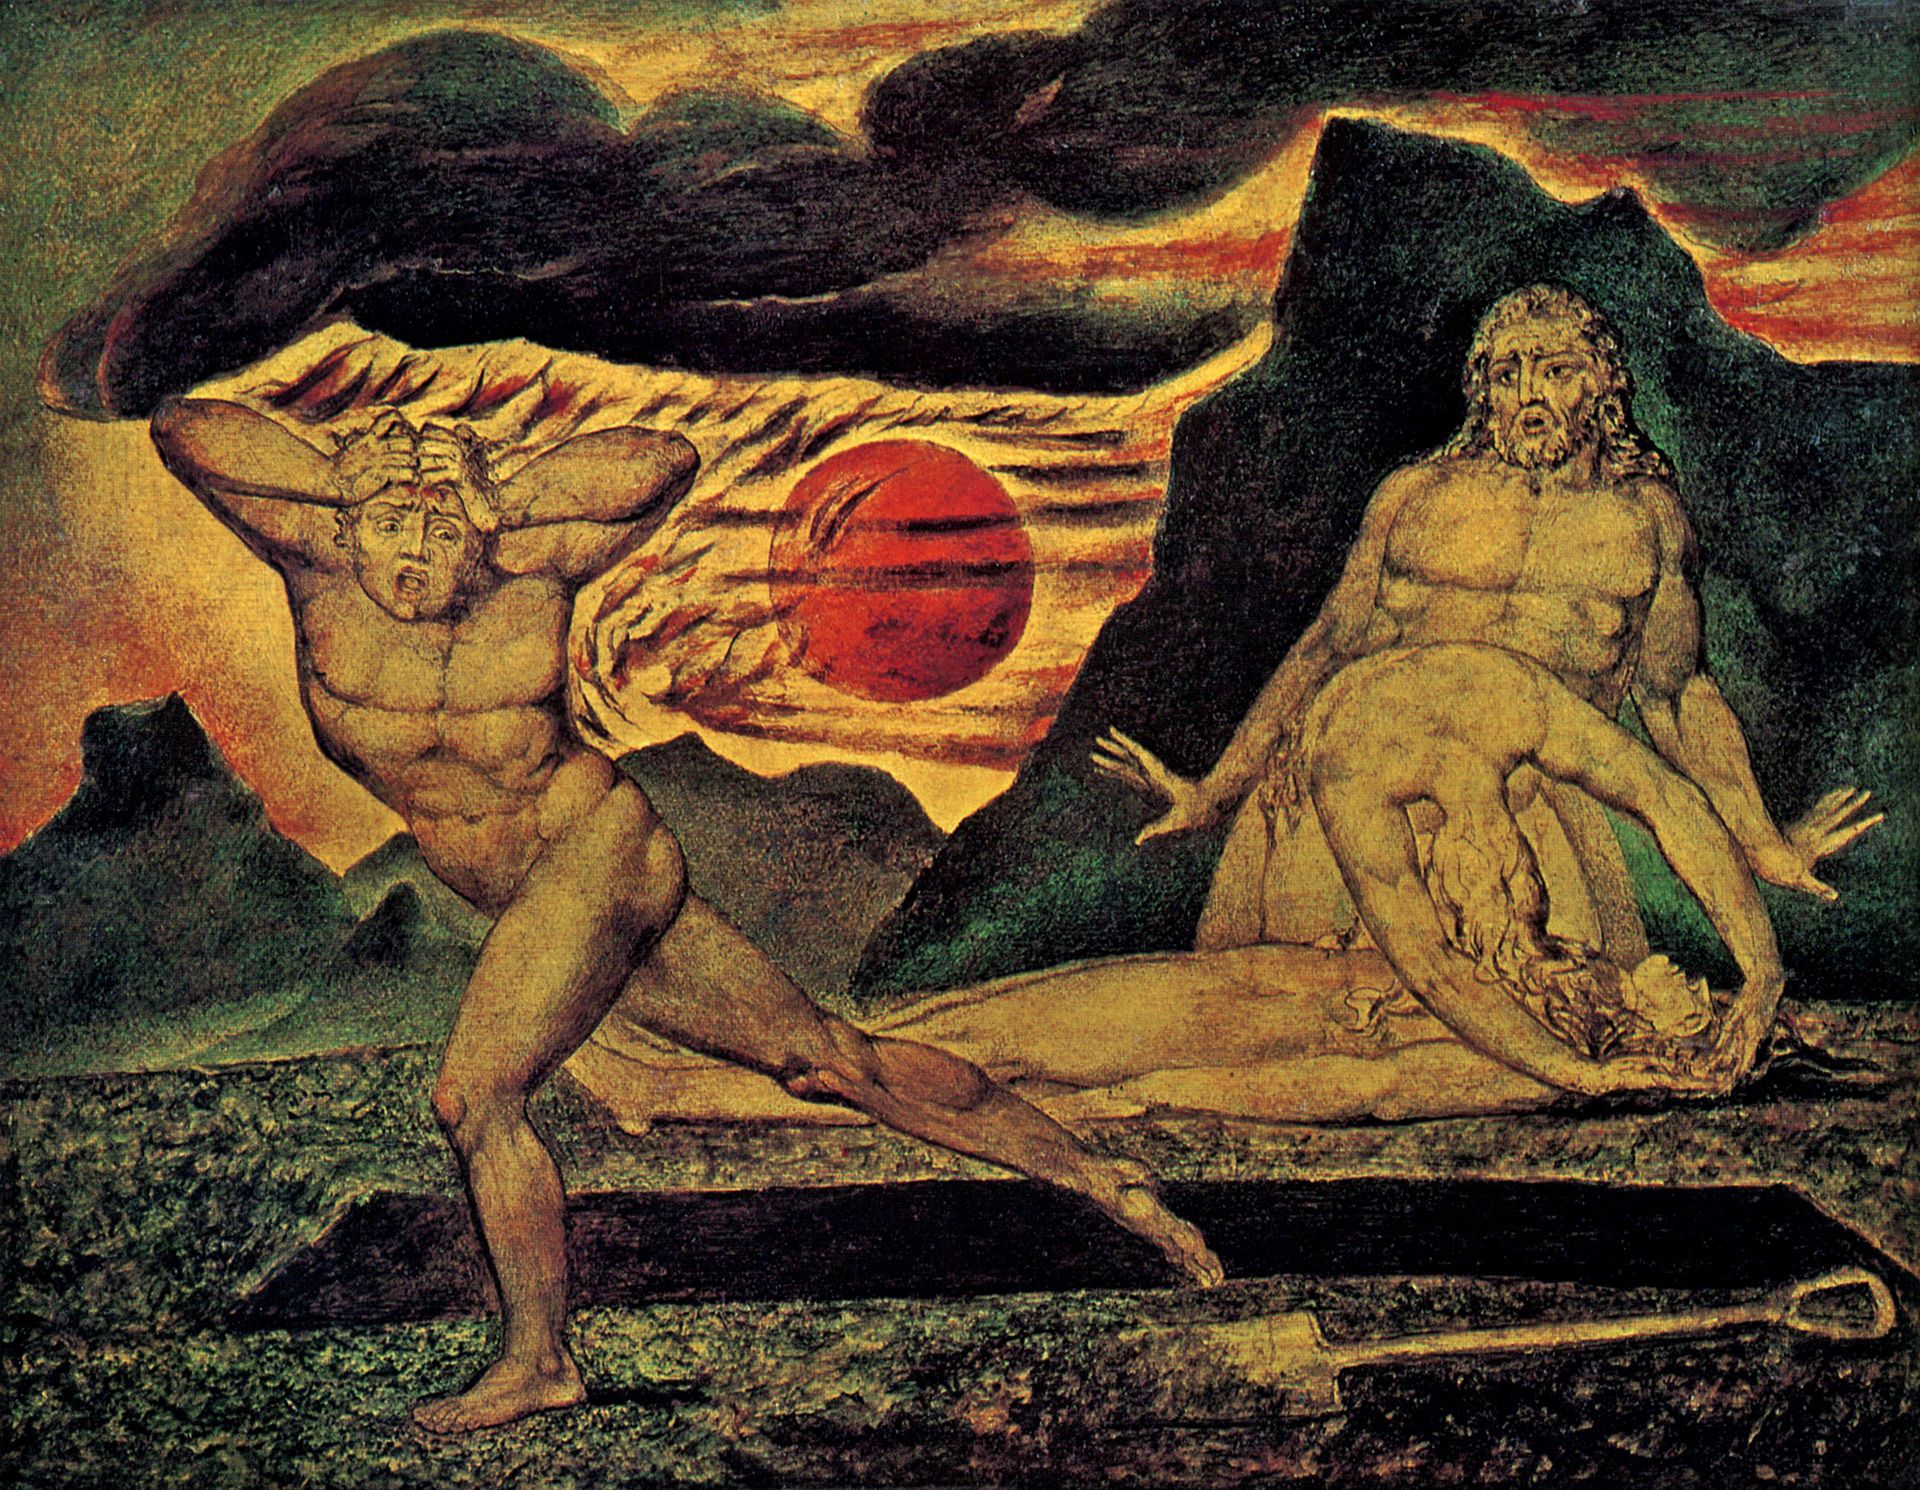 Cain and Abel by William Blake